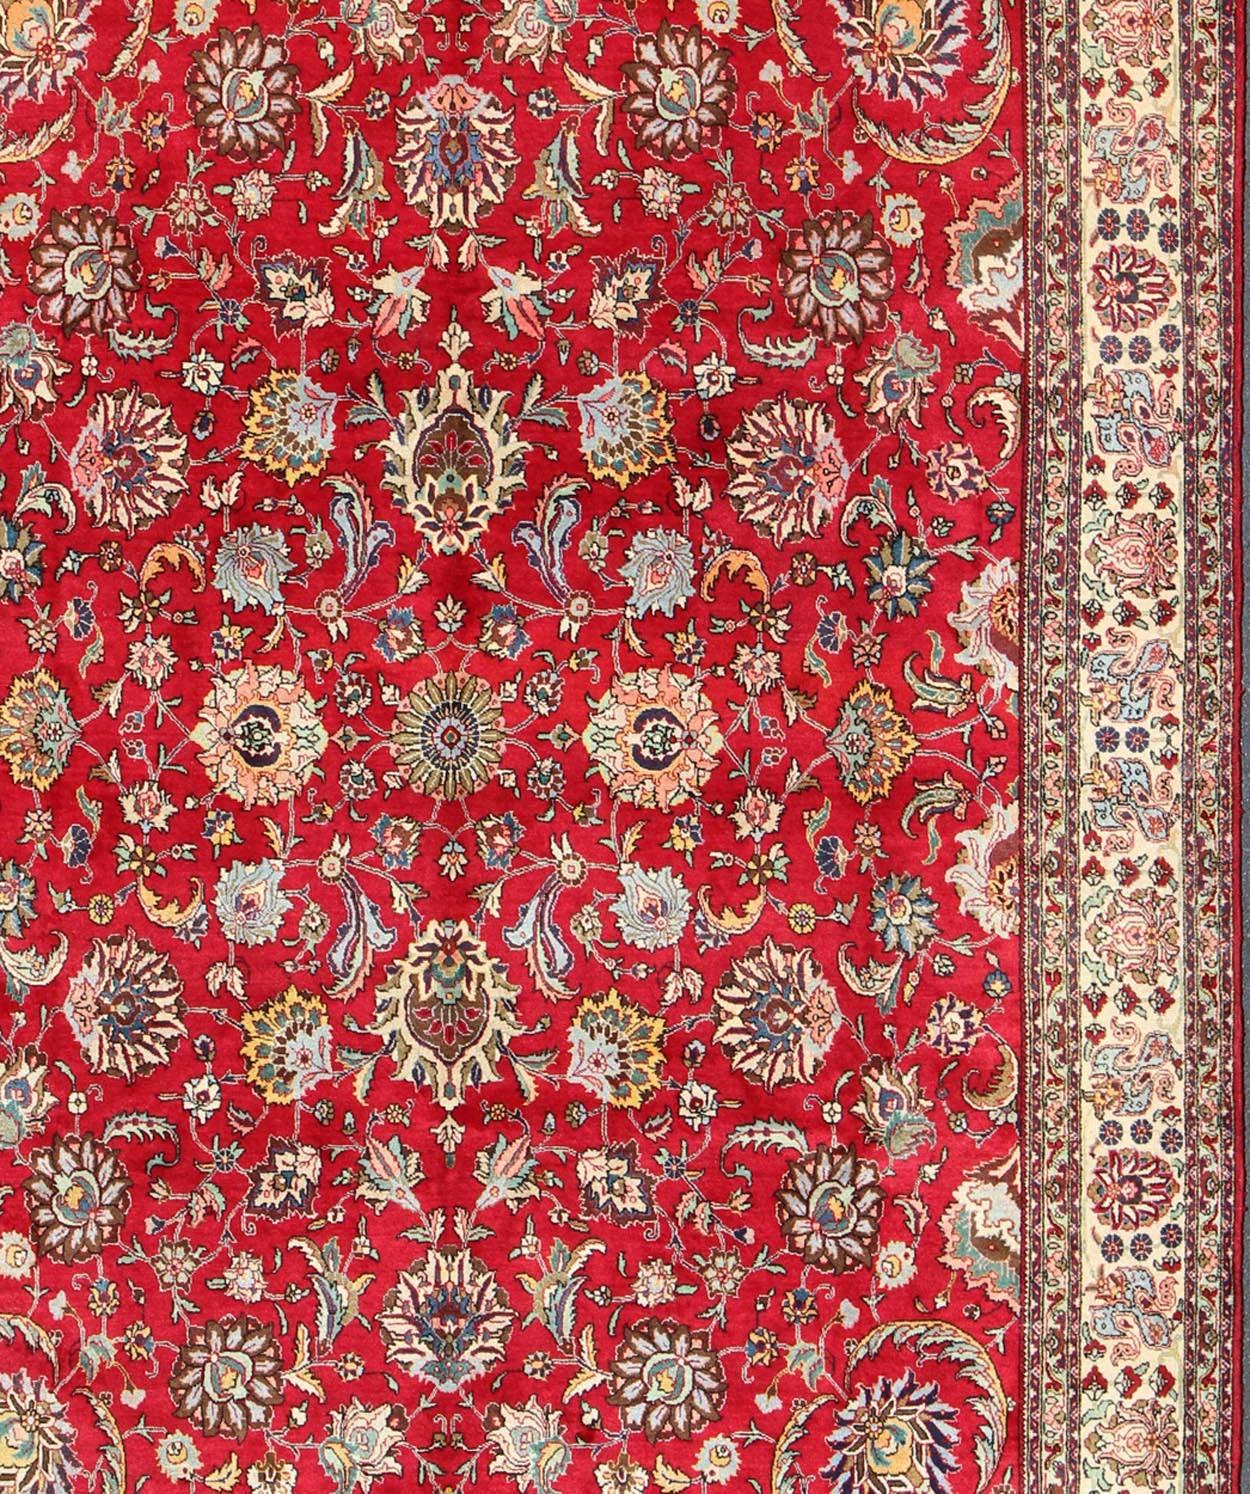 Semi Antique Persian Tabriz Rug with All-Over Blossom Design In Red and Ivory  In Excellent Condition For Sale In Atlanta, GA